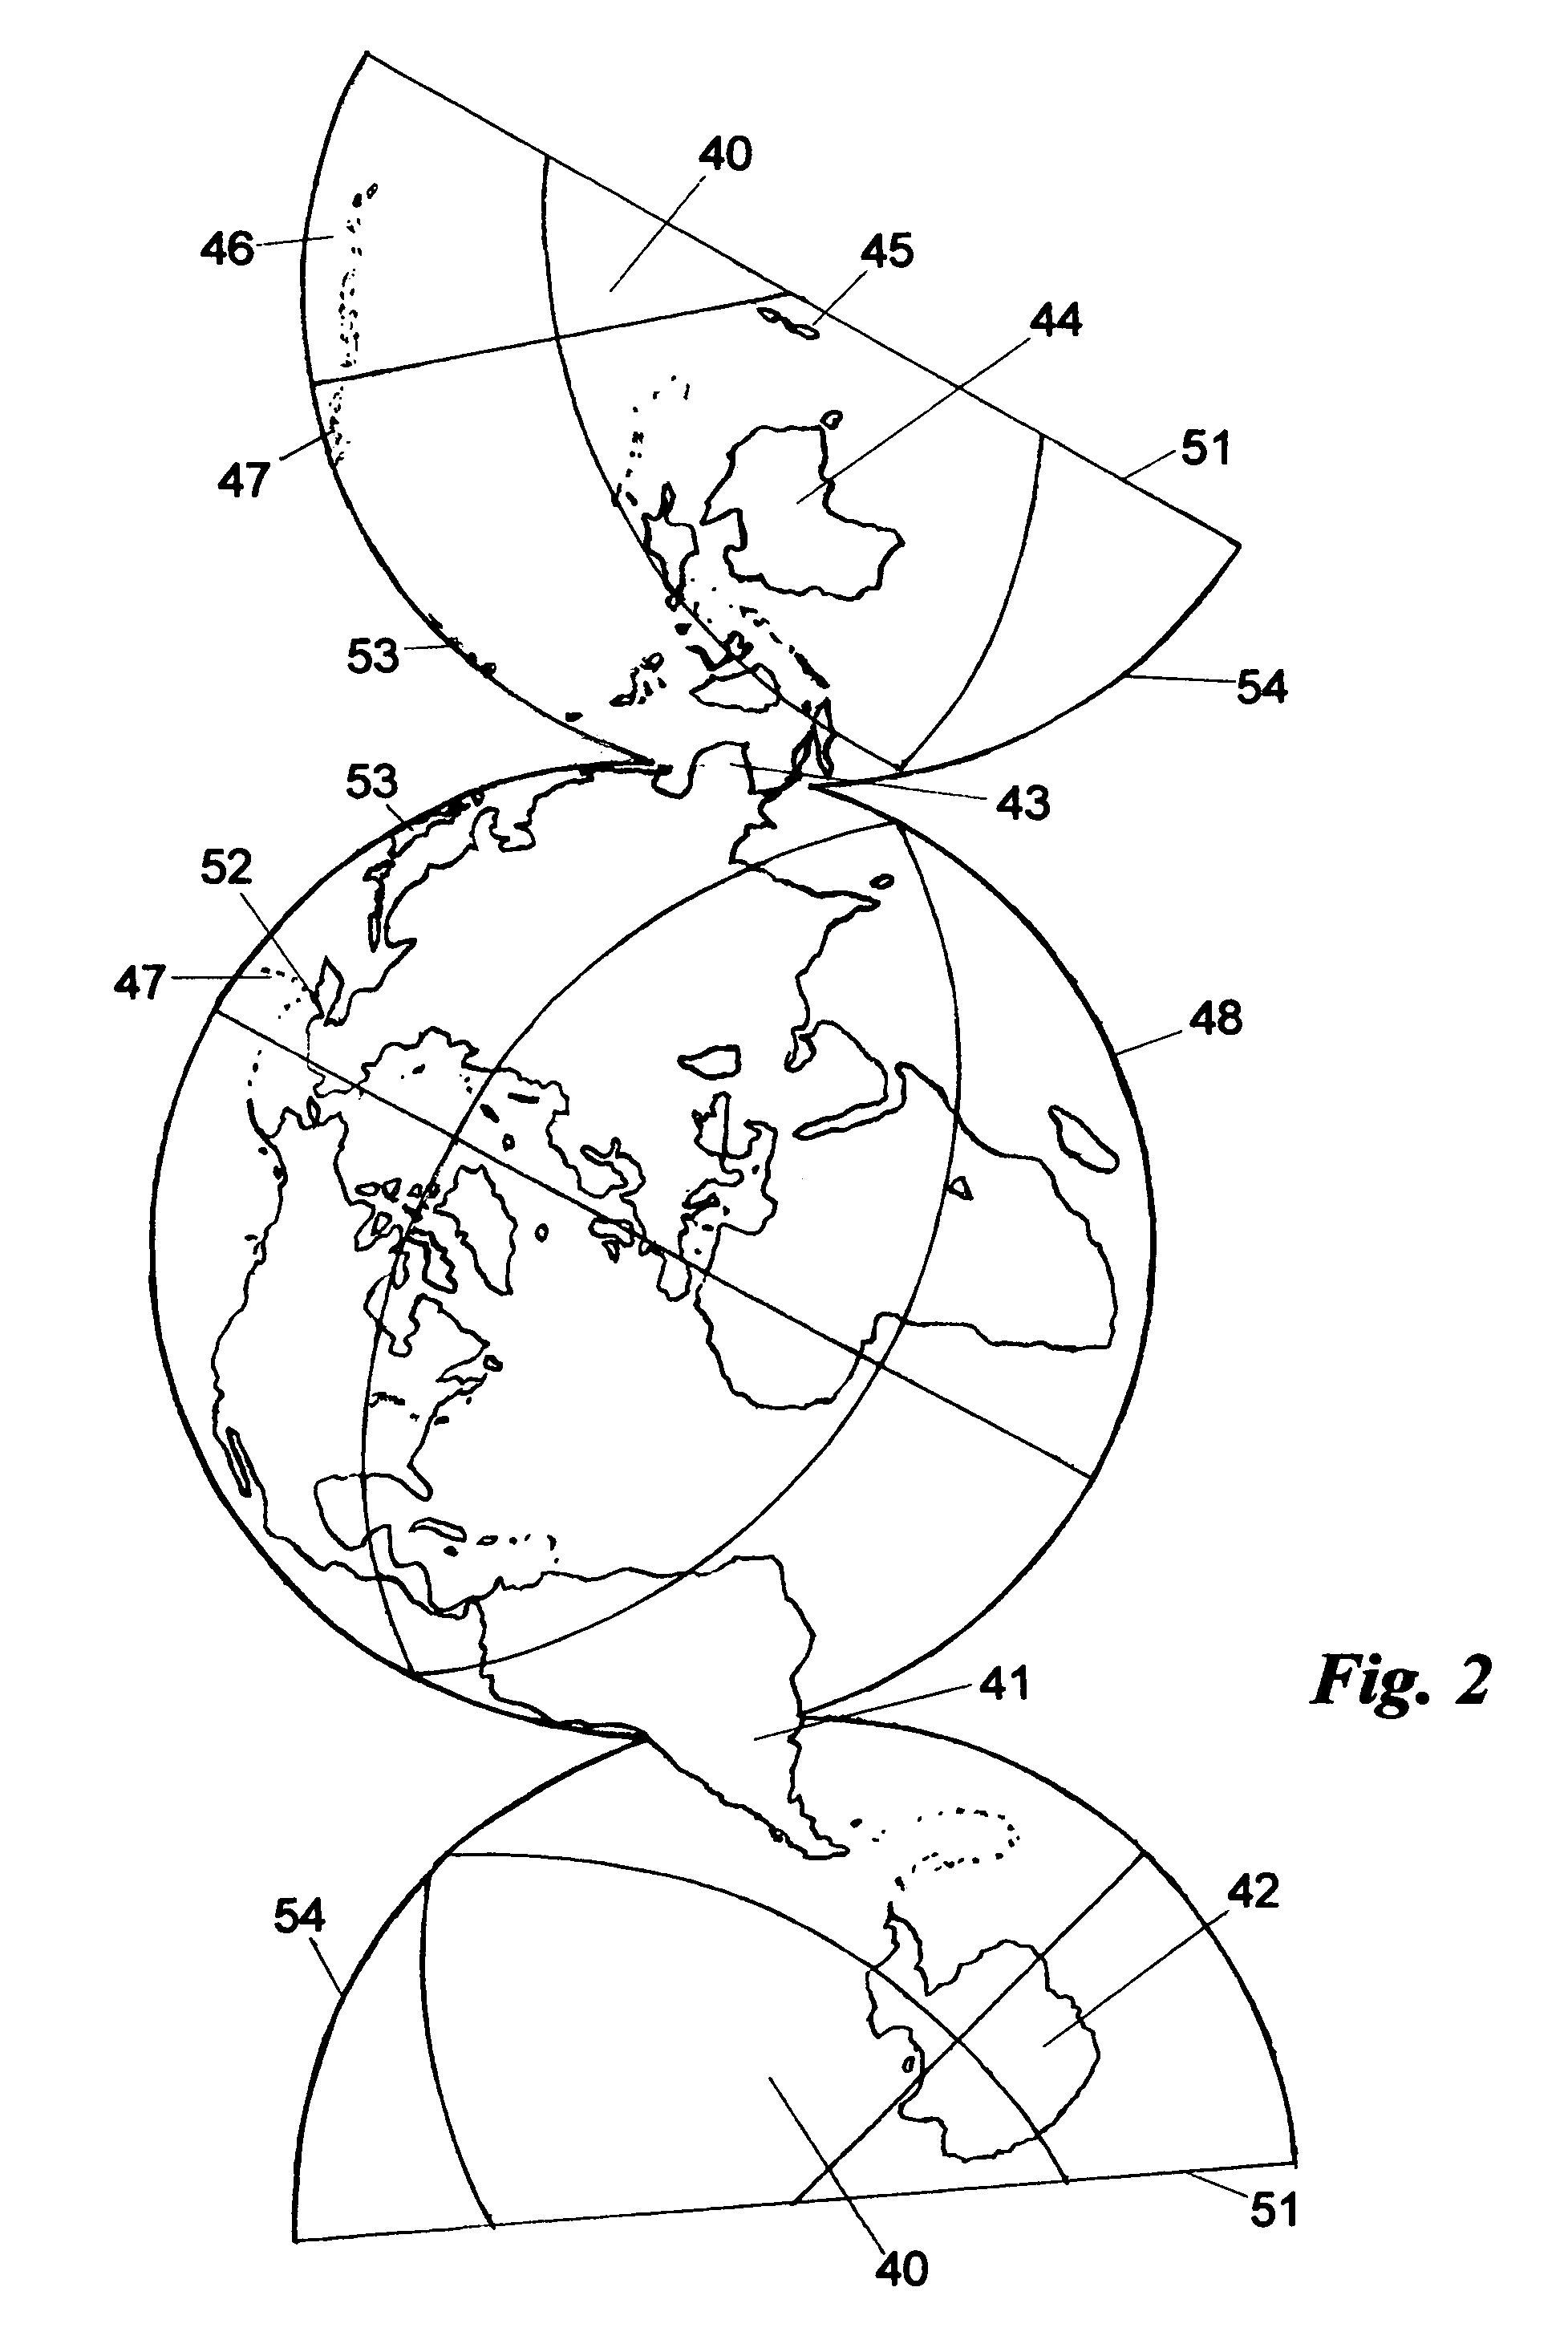 Map (profile) of the earth's continents and methods of manufacturing world maps